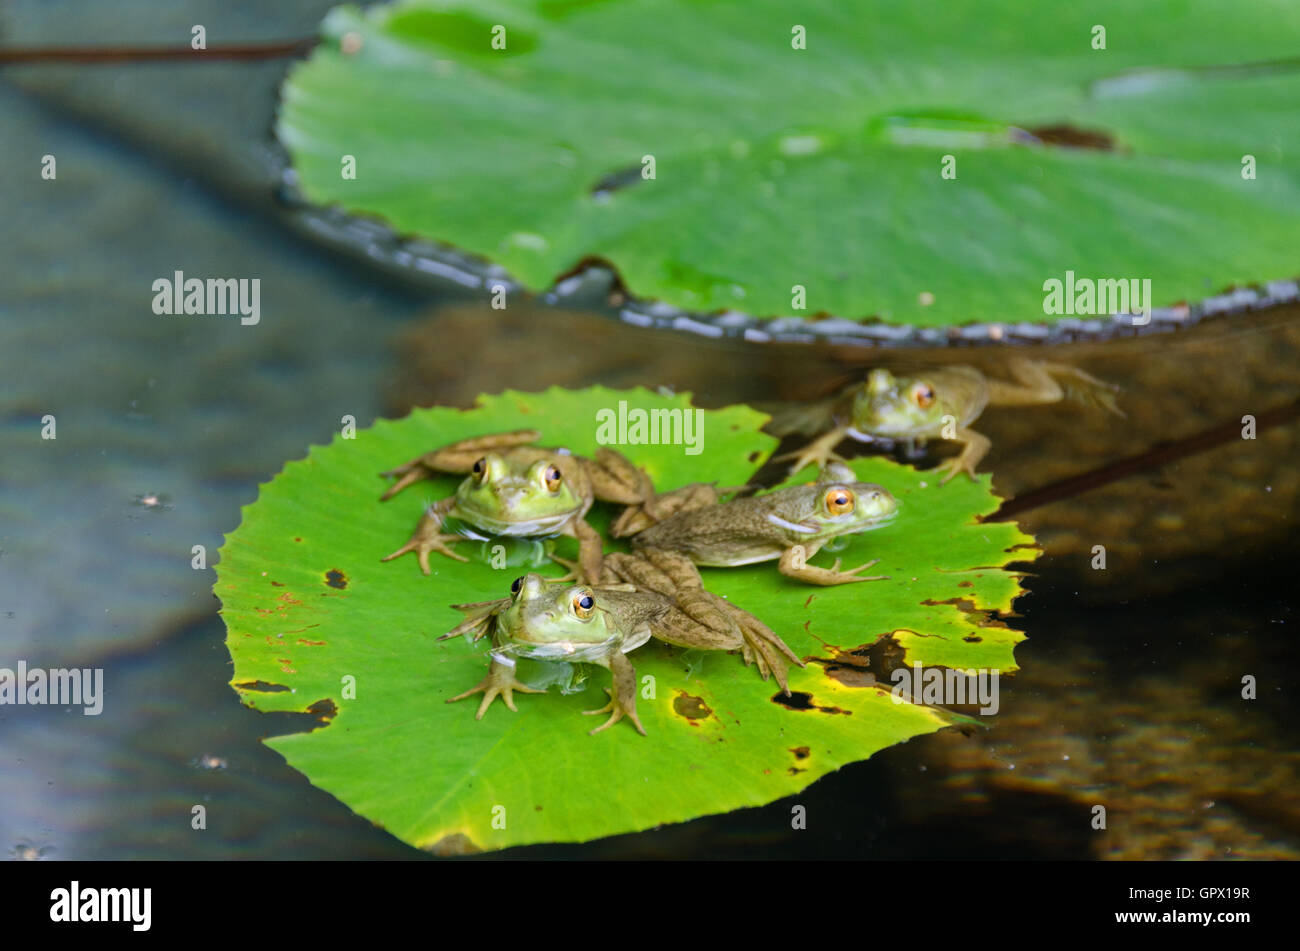 Four Green Frogs (Rana clamitans melanota) on lily pads in a garden pool, Mount Desert Island, Maine. Stock Photo